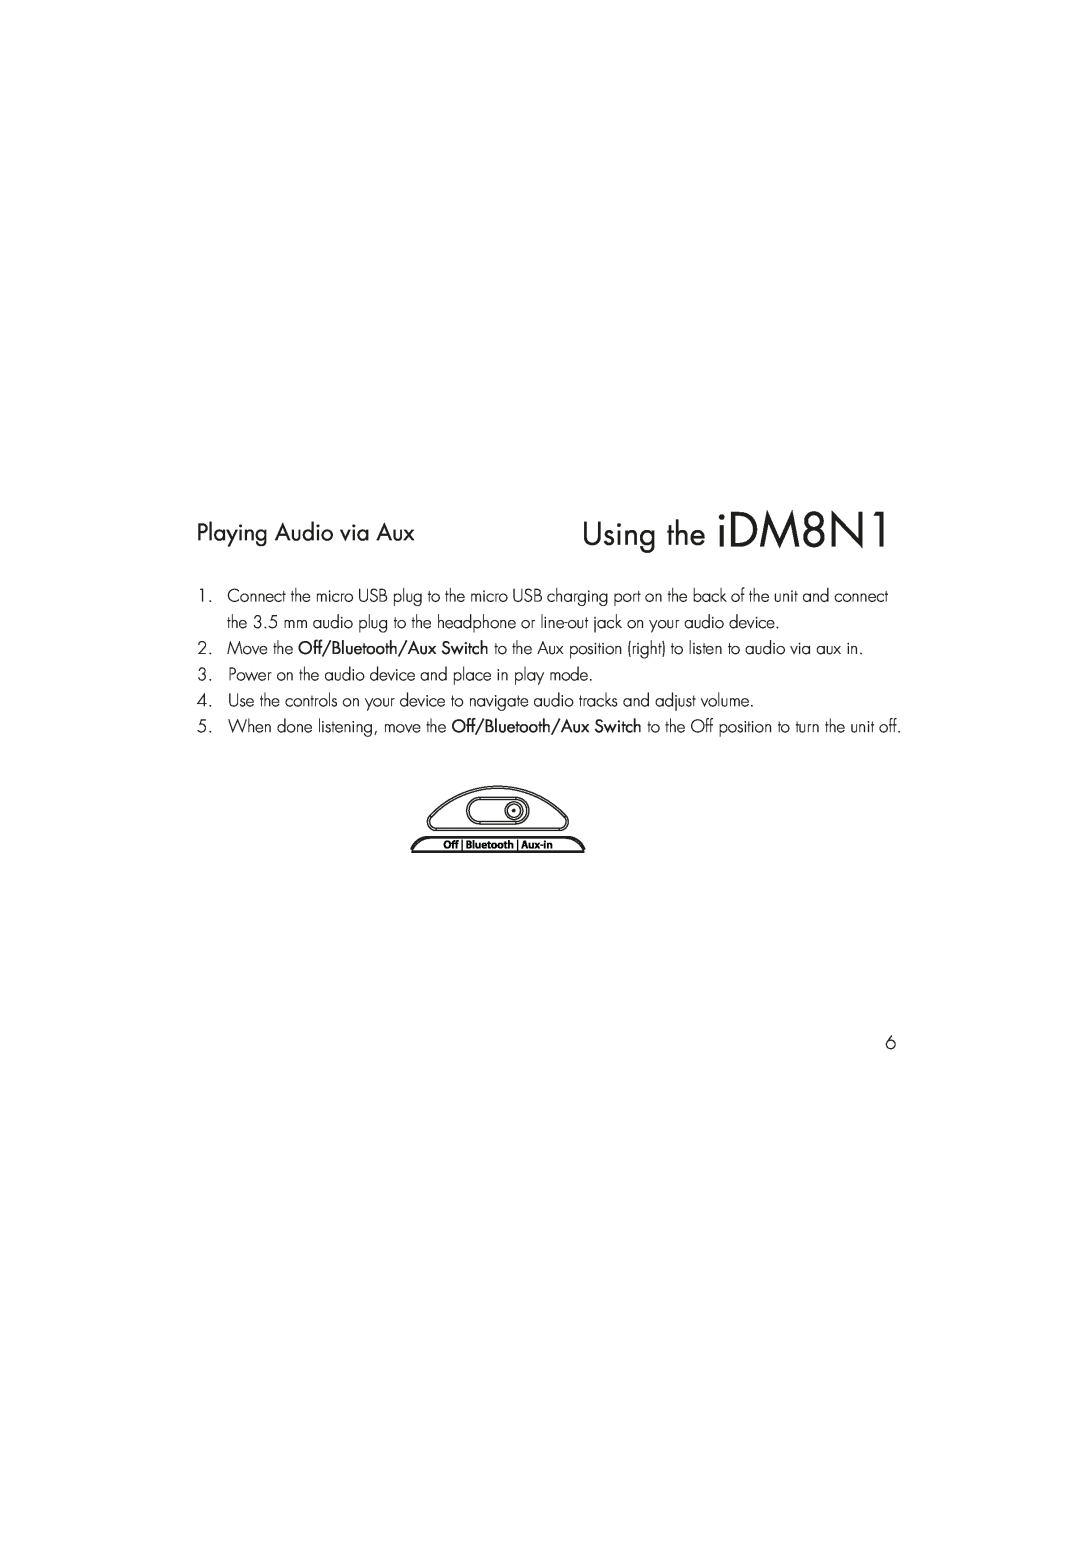 iHome instruction manual Playing Audio via Aux, Using the iDM8N1 